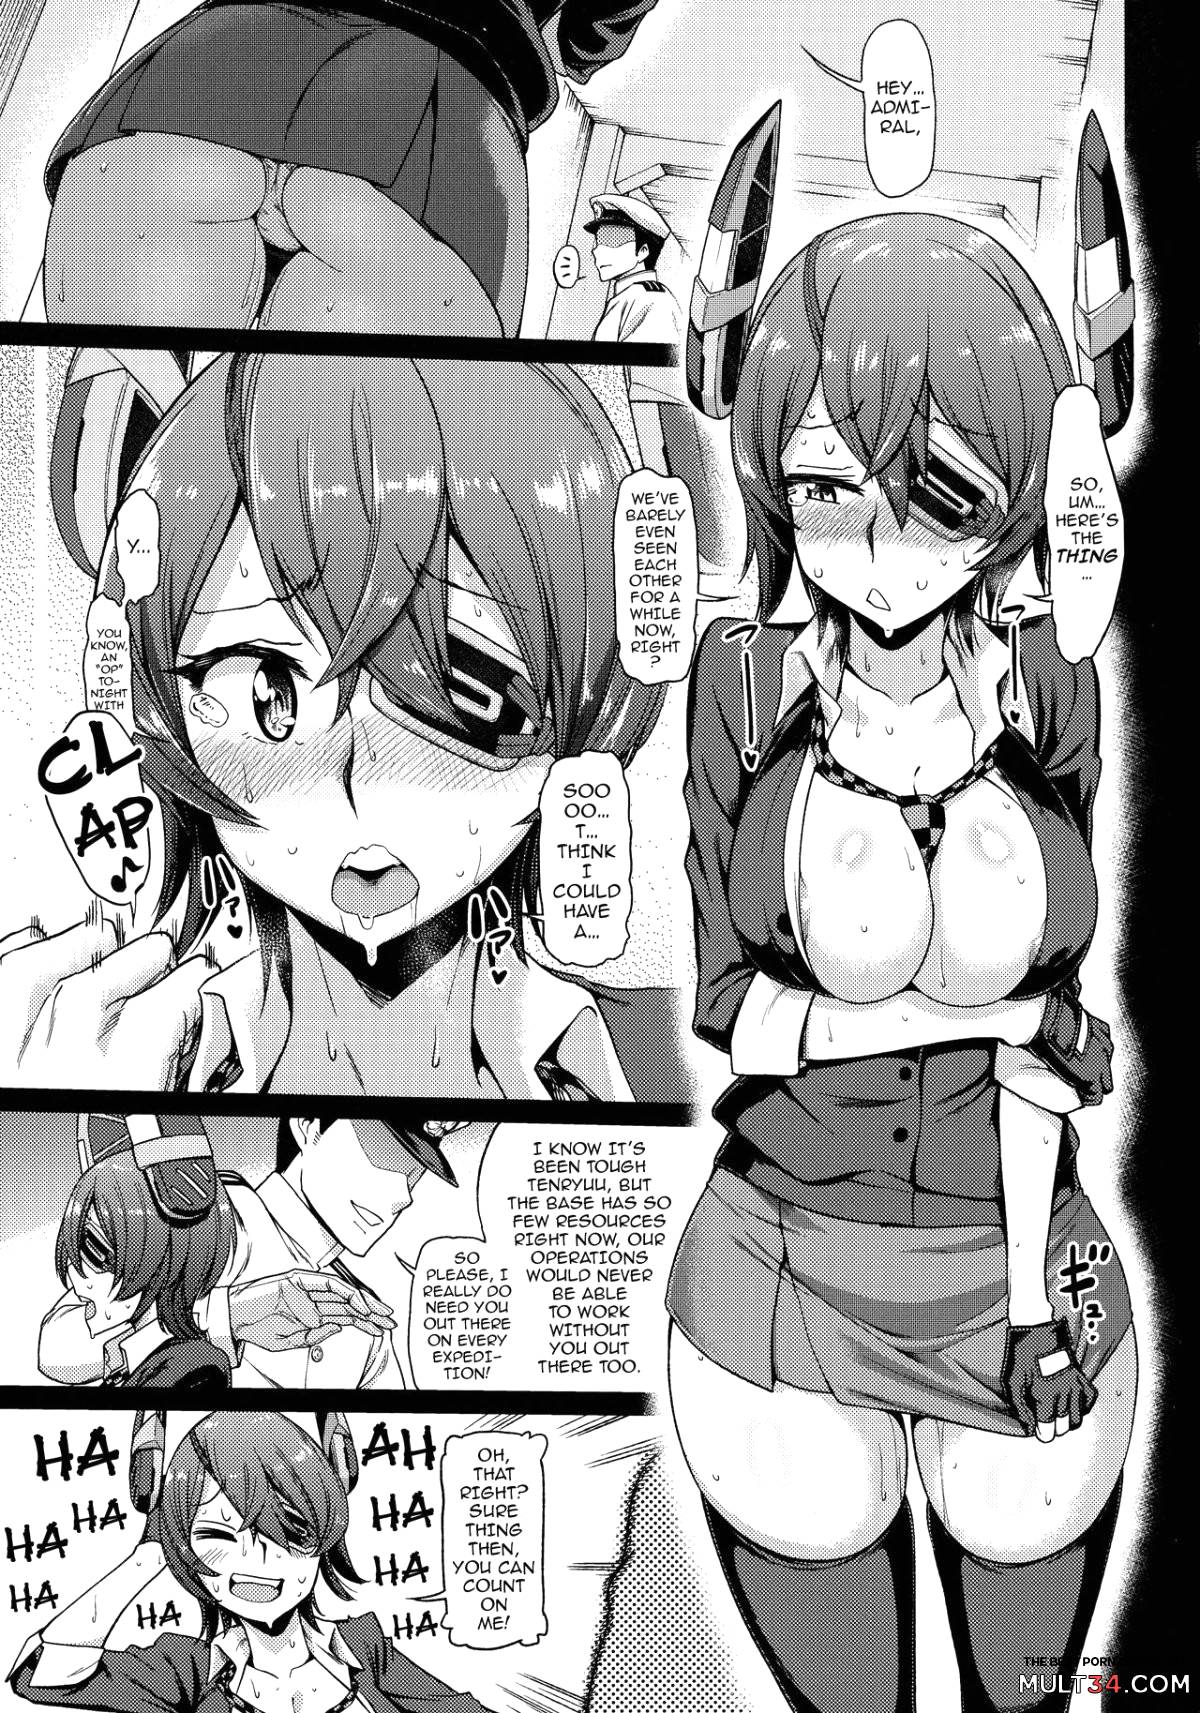 I Told You Supply Depot, This Tenryuu Belongs to You!! page 2